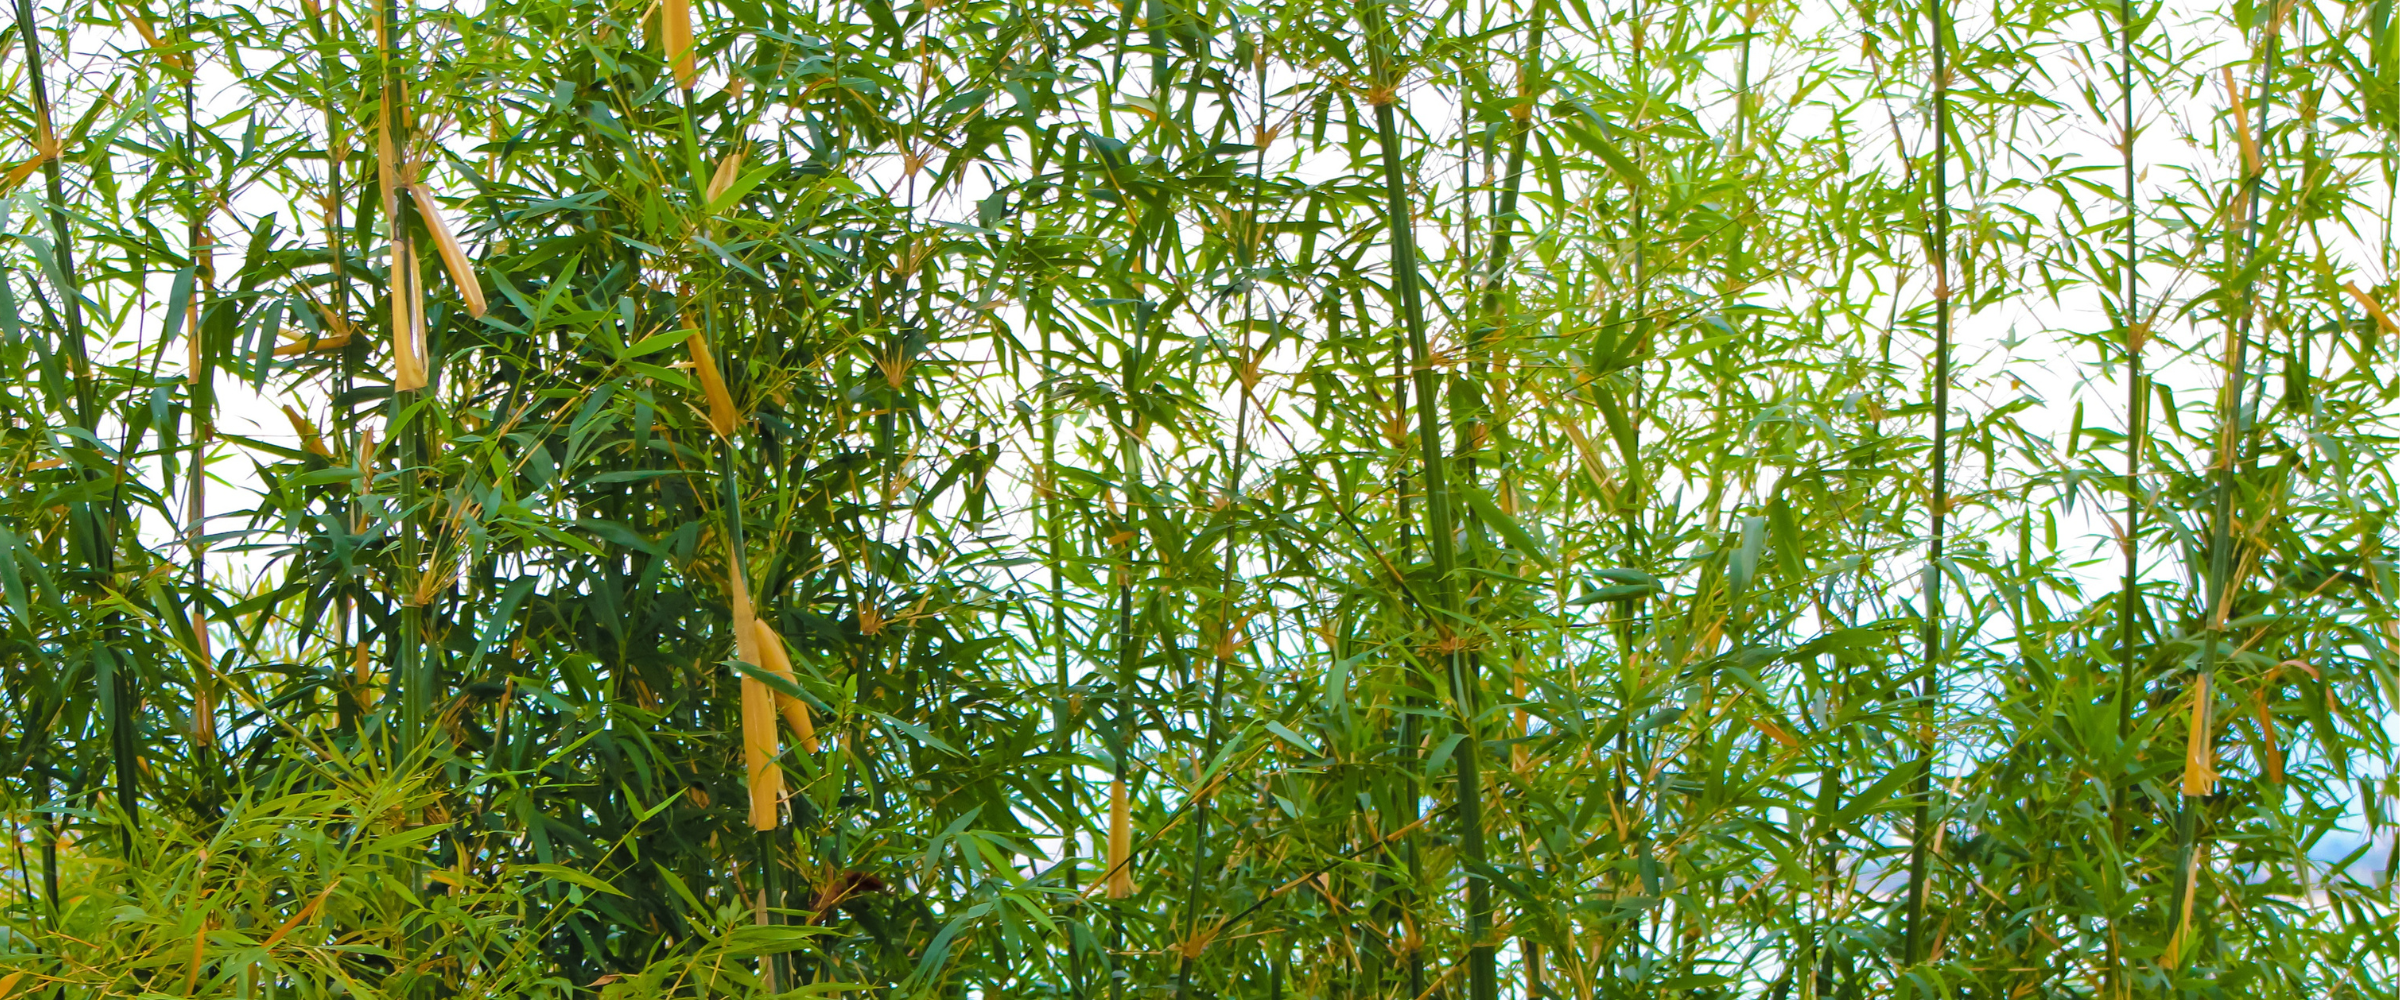 Enhancing Your Garden with Clumping Bamboo Plants for Privacy Screening image